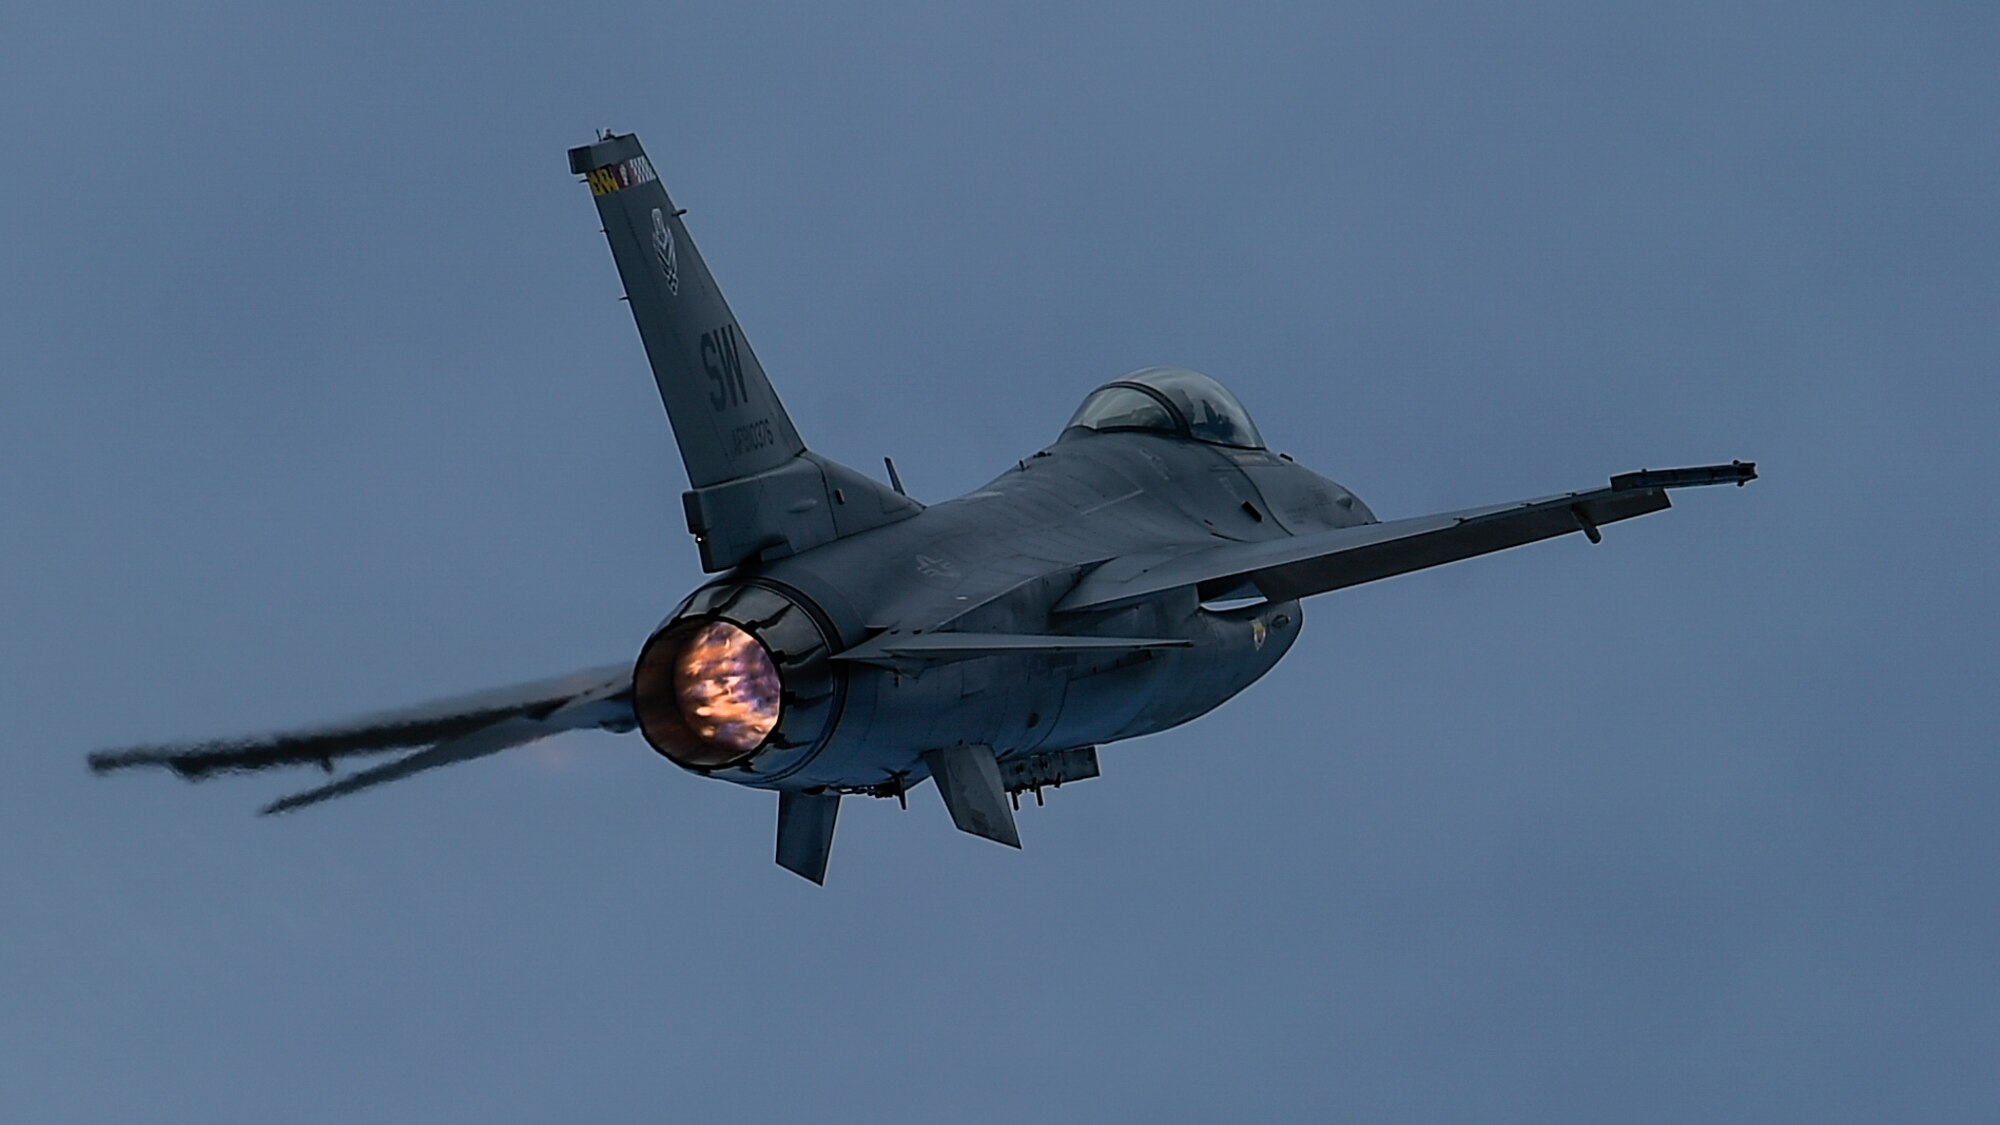 A U.S. Air Force F-16 Fighting Falcon utilizes its afterburner during the 2017 Heritage Flight Training and Certification Course at Davis-Monthan Air Force Base, Ariz., Feb. 11, 2017. The F-16 is highly maneuverable and has proven itself in air-to-air combat and air-to-surface attack. It provides a relatively low-cost, high performance weapon system for the U.S. and its allied nations. (U.S. Air Force photo by Senior Airman Chris Drzazgowski)